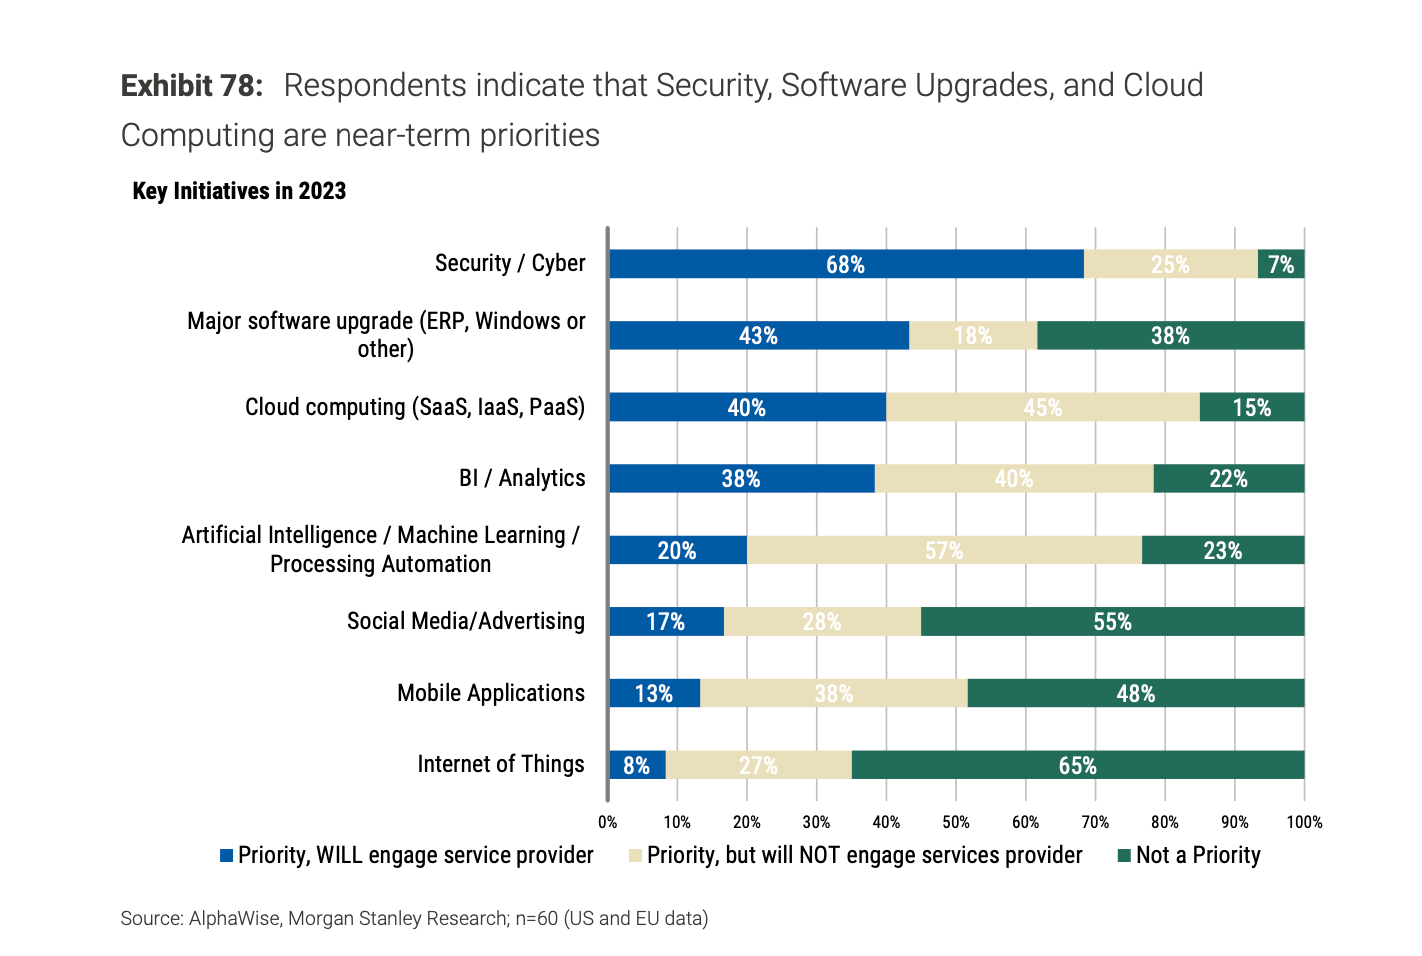 Security Software Upgrades and Cloud Computing are near term priorities